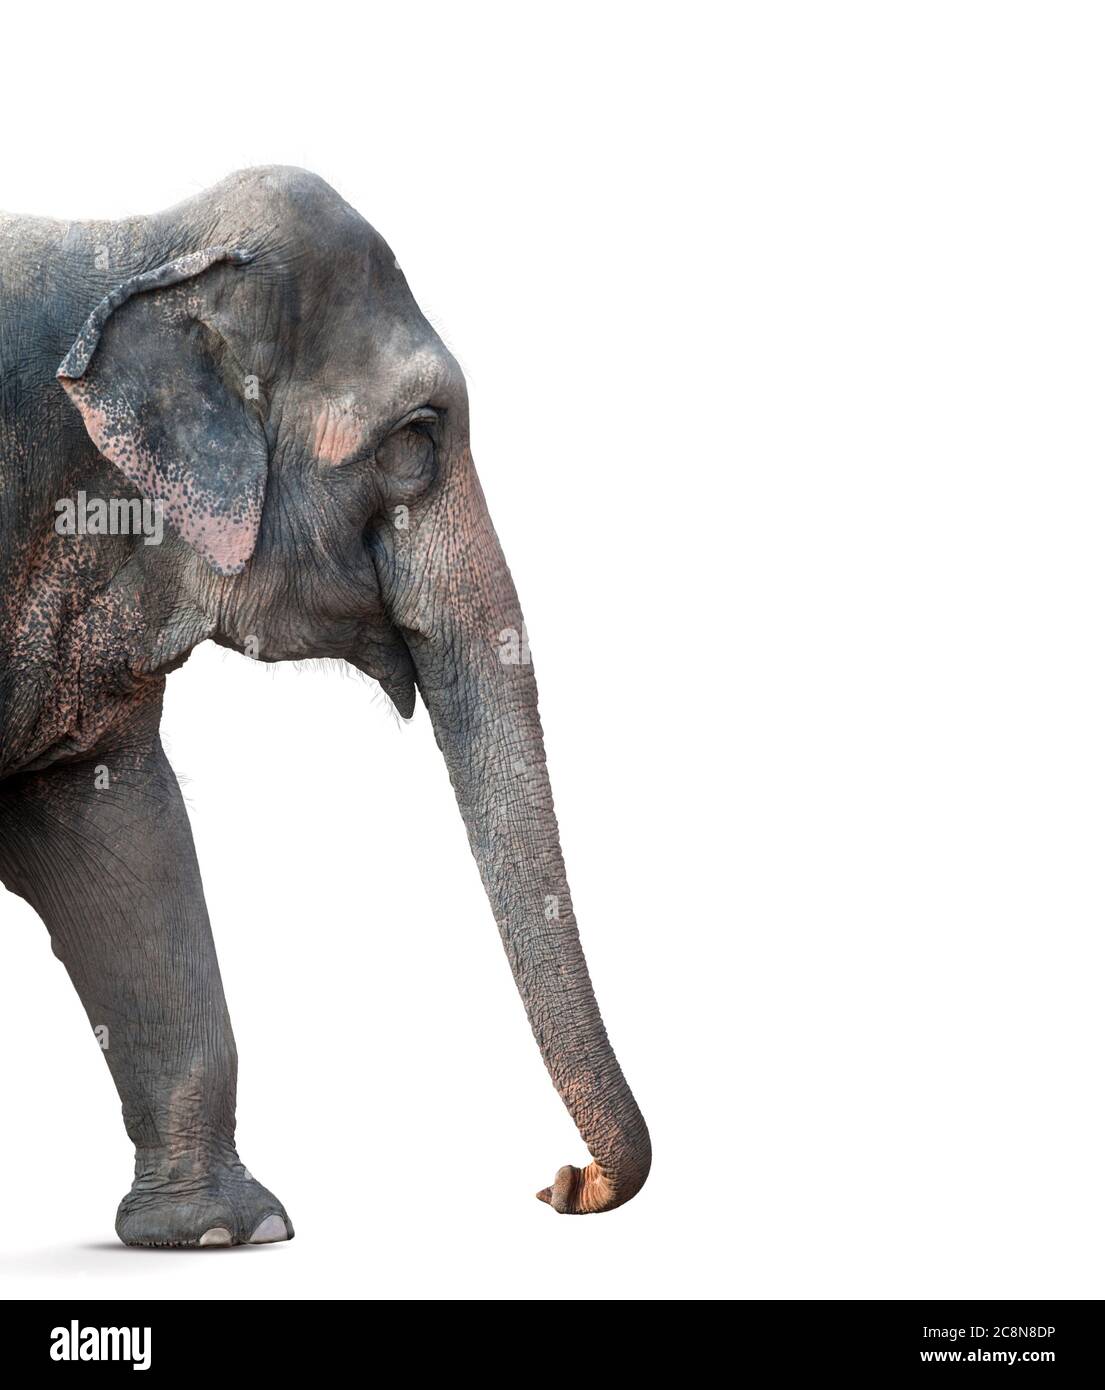 Indian elephant steps forward isolated over a white Stock Photo